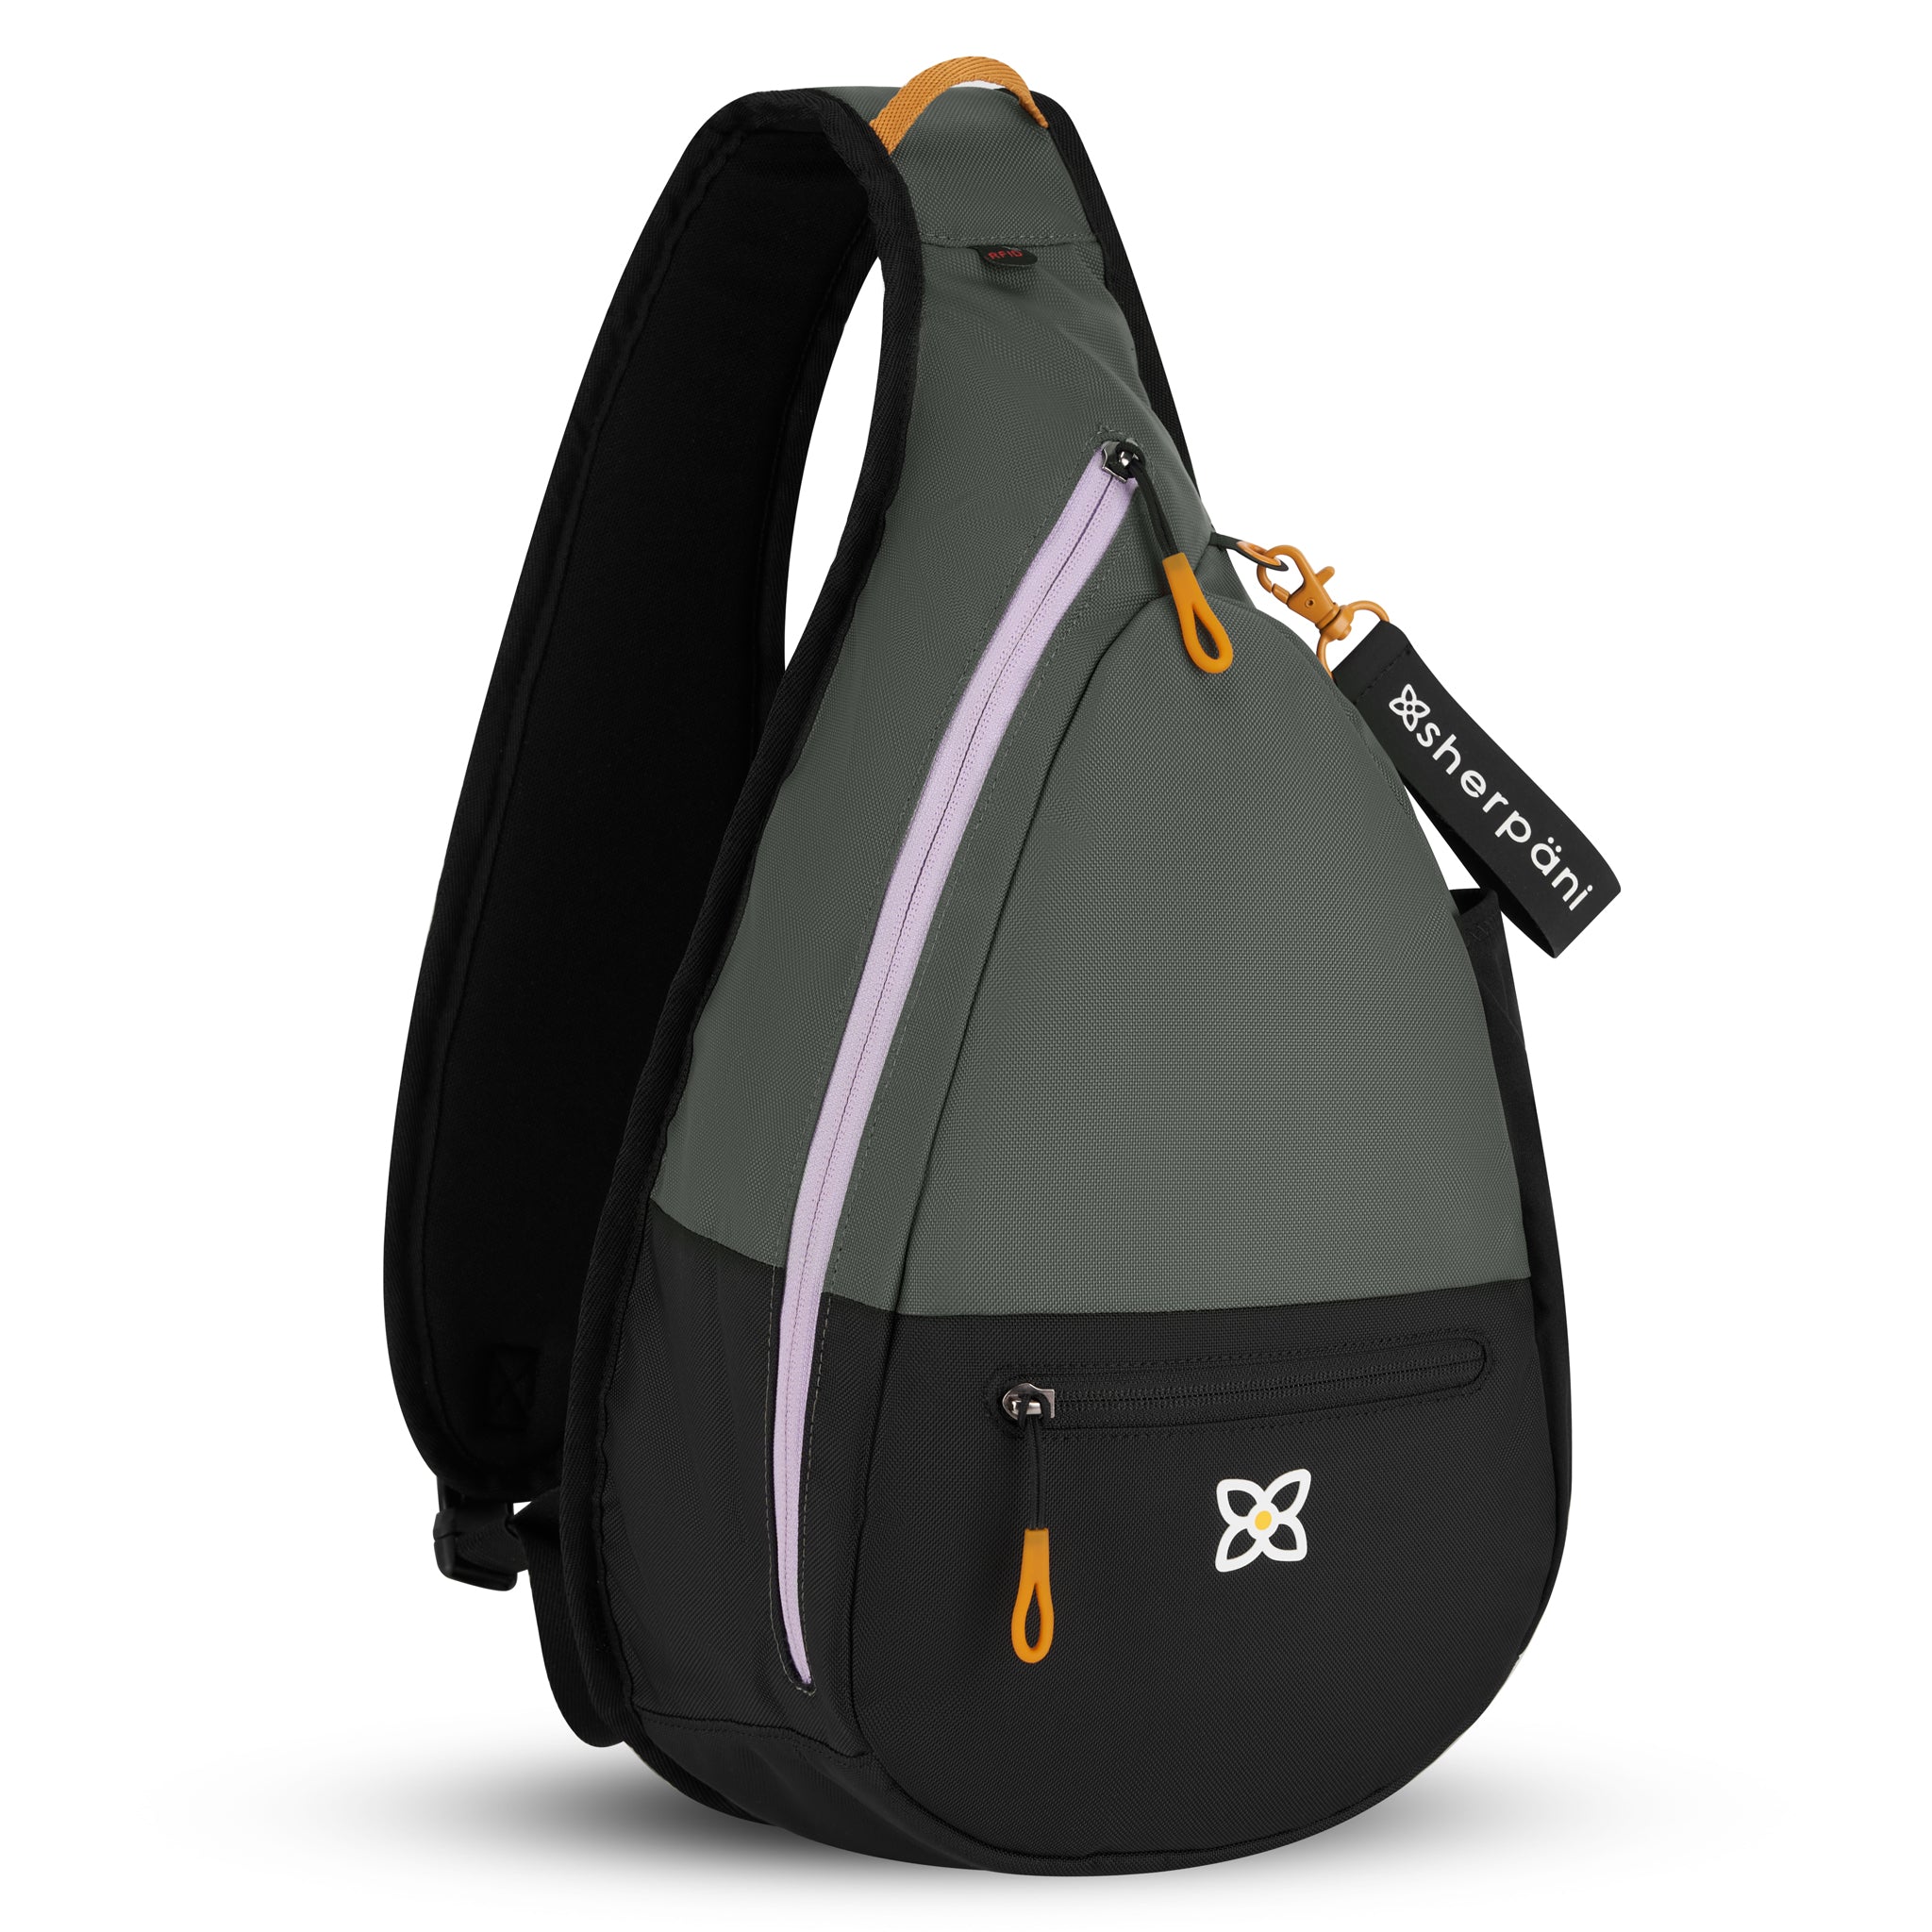 Angled front view of Sherpani sling backpack for women, the Esprit in Juniper. Esprit features include front zipper pocket, side zipper pocket, inside mesh pocket, RFID blocking, detachable key chain and an adjustable sling strap. The Juniper color is two-toned in black and gray with accents in lavender and yellow. 